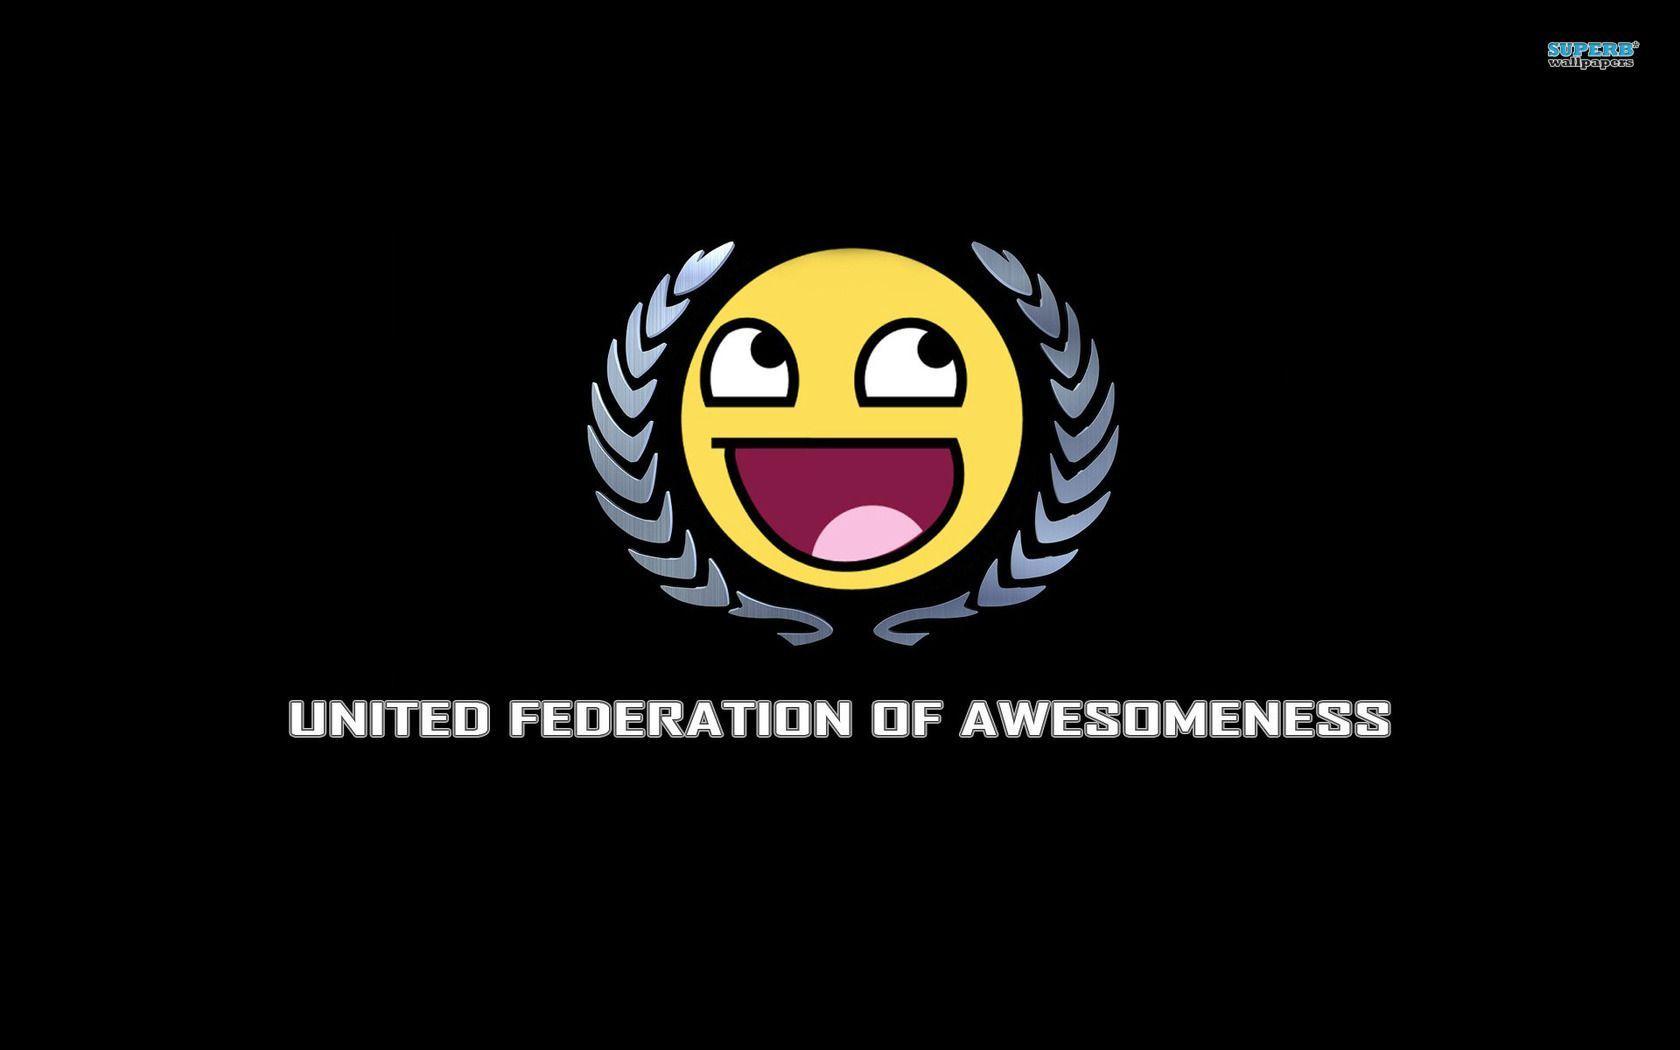 United Federation of Awesomeness wallpaper wallpaper - #